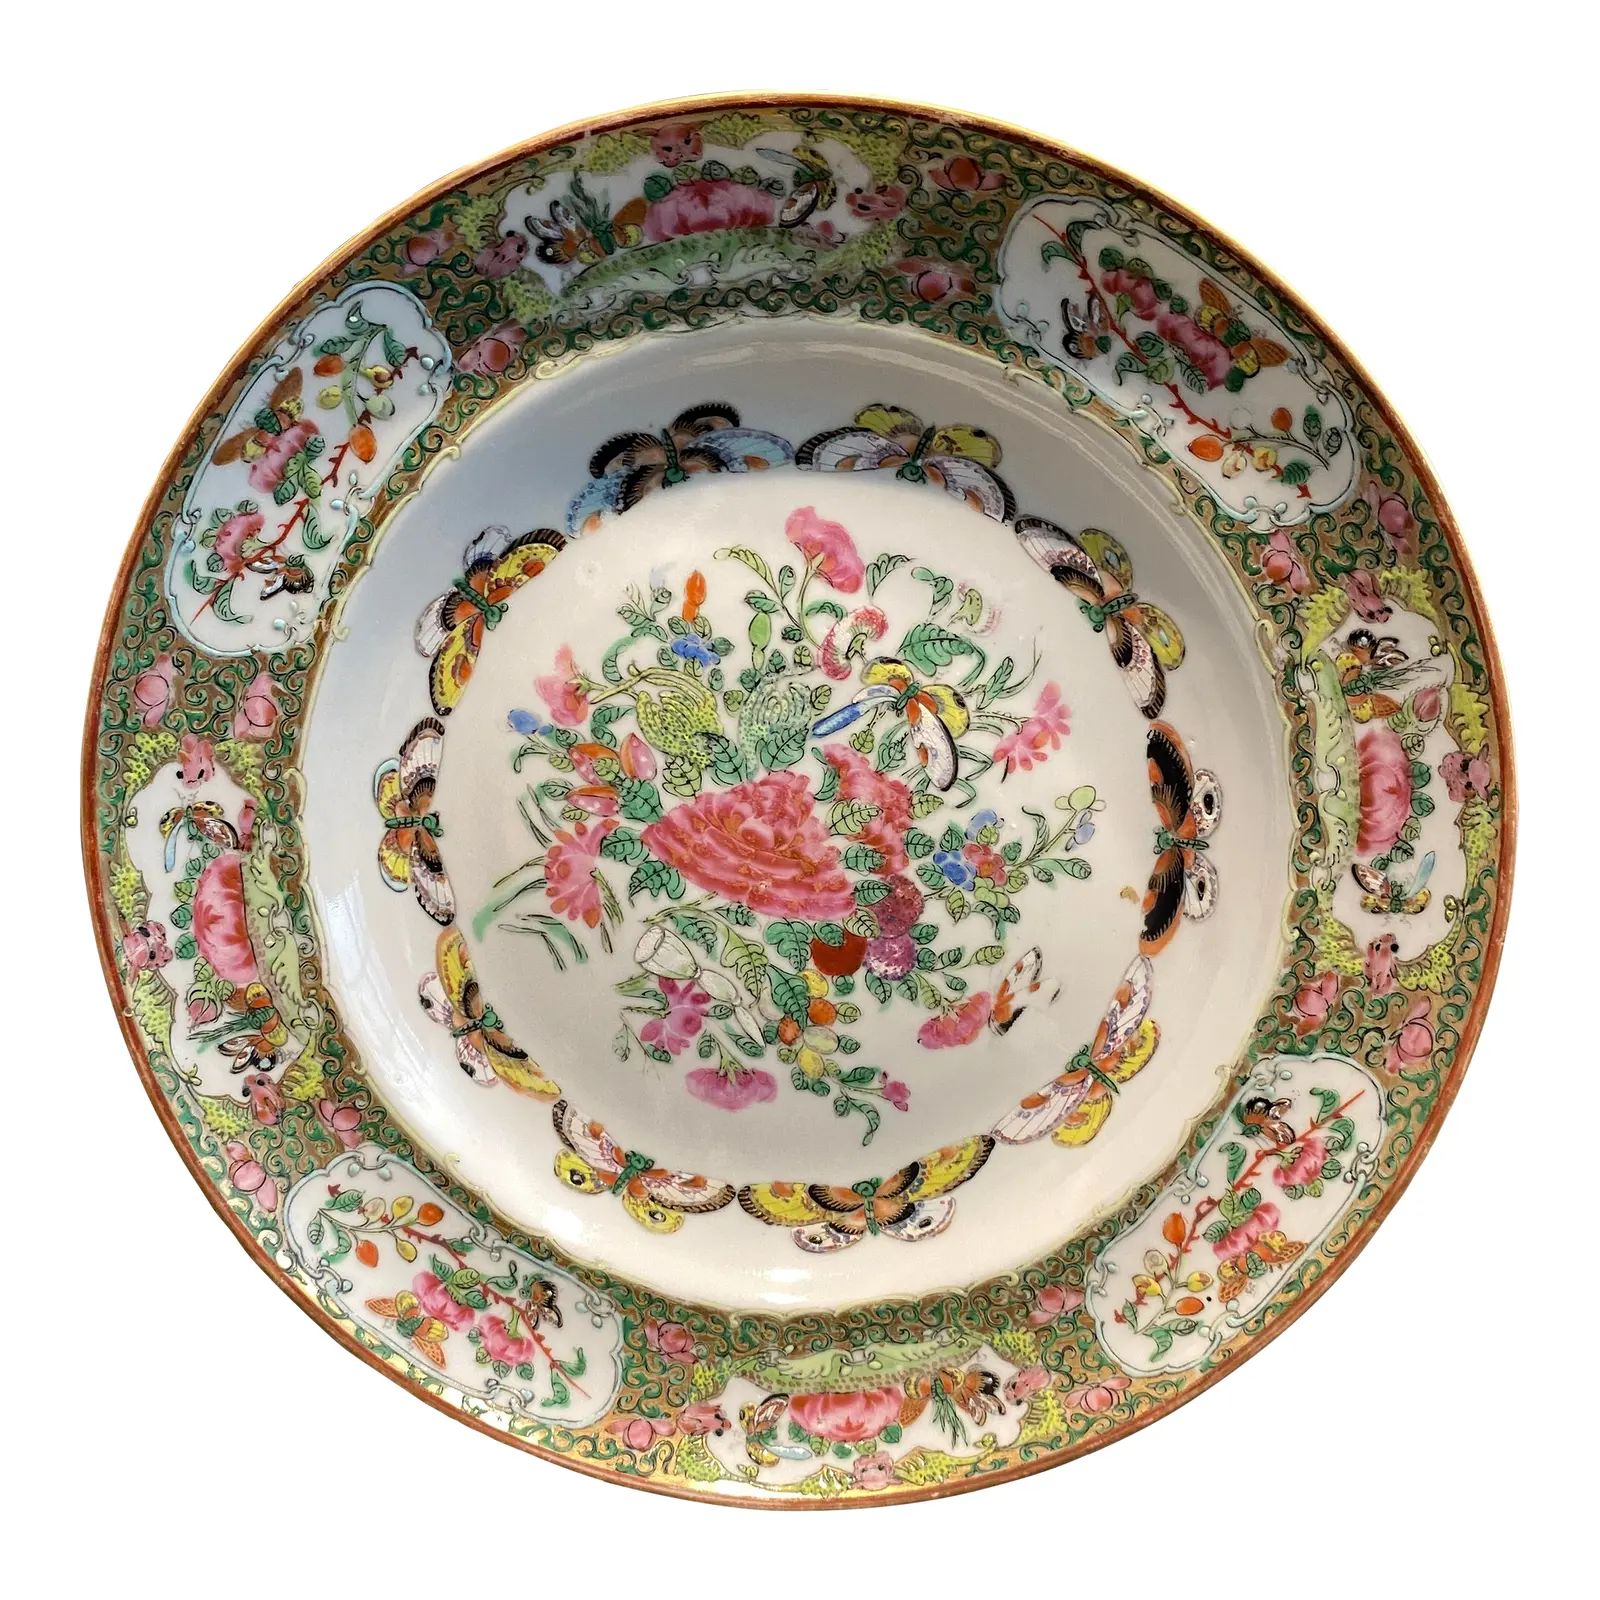 Antique Chinese Porcelain Famille Rose Medallion Plate | Chairish